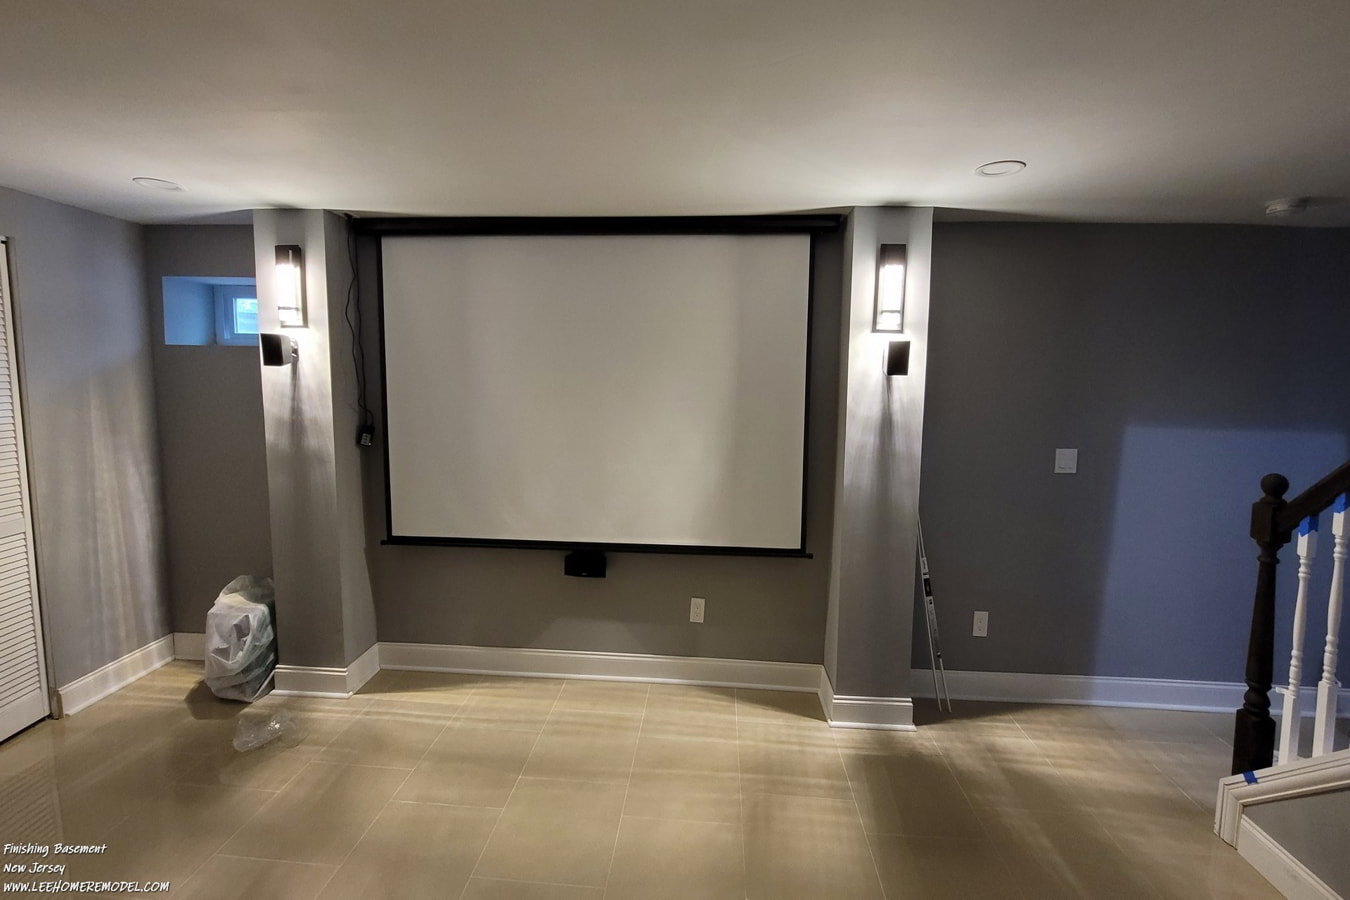 26-finished-basement-home-theatre-proyector-movi-ewing-new-jersey-1350x900.jpeg